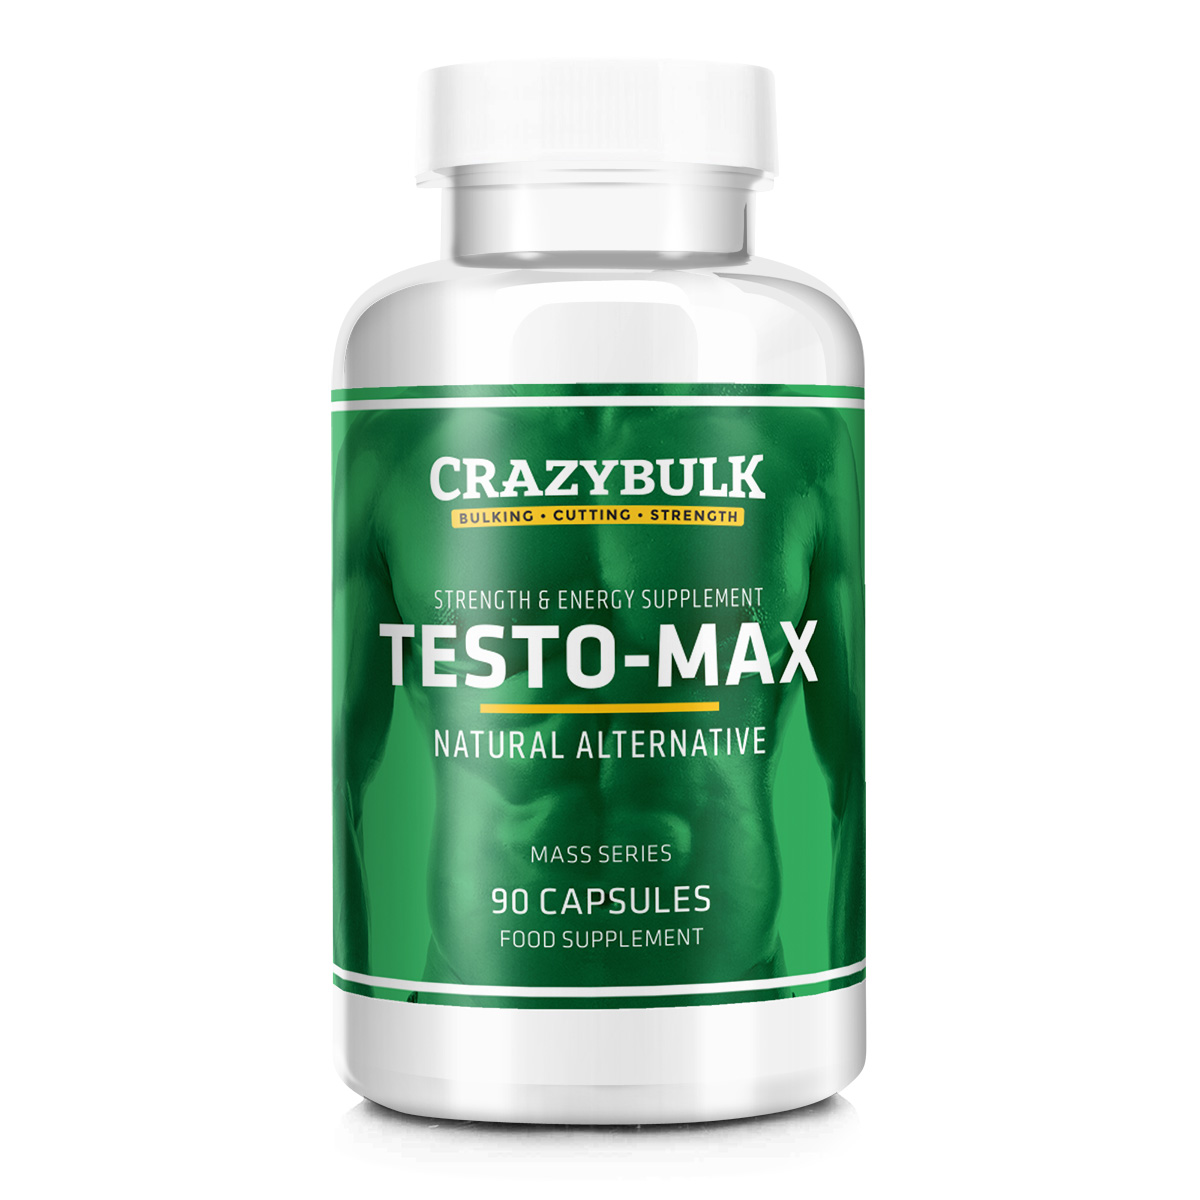 How to Purchase The Testosterone Steroid Bulking Stack in Your Country